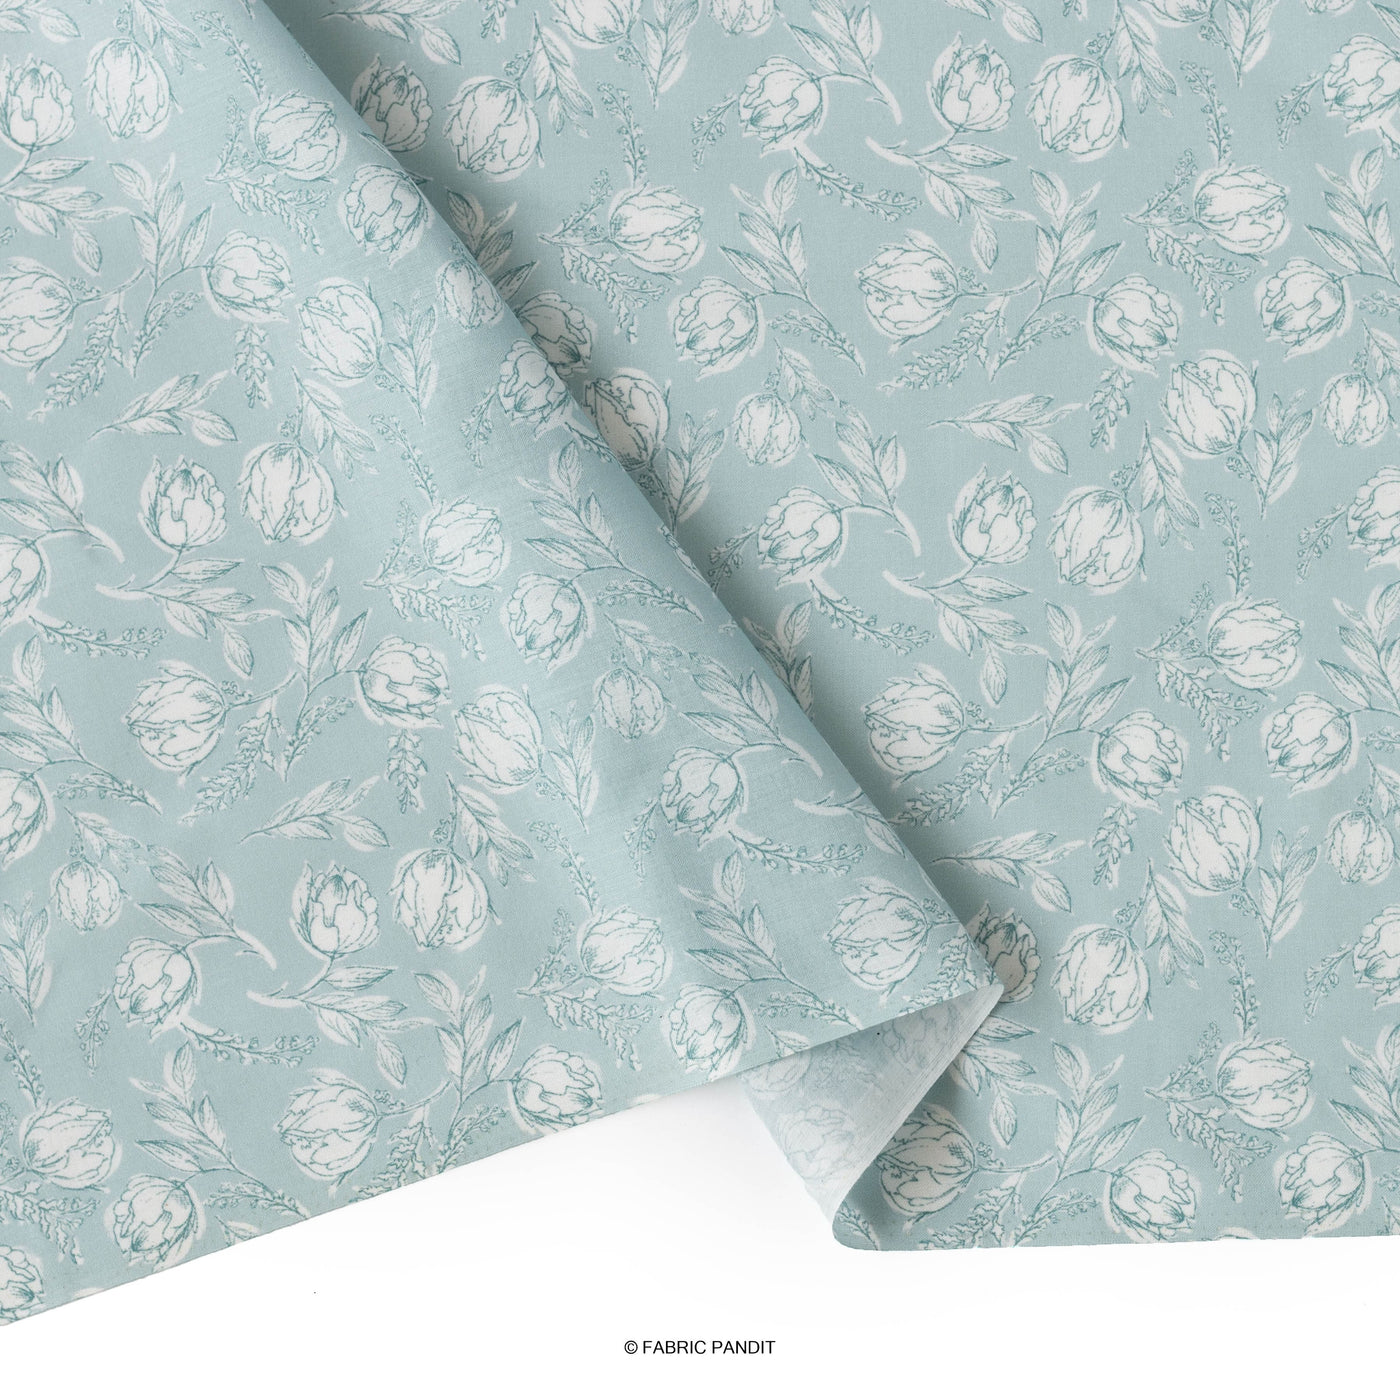 Fabric Pandit Cut Piece (CUT PIECE) Ice Blue Tulip All Over Digital Printed Cambric Fabric (Width 43 Inches)